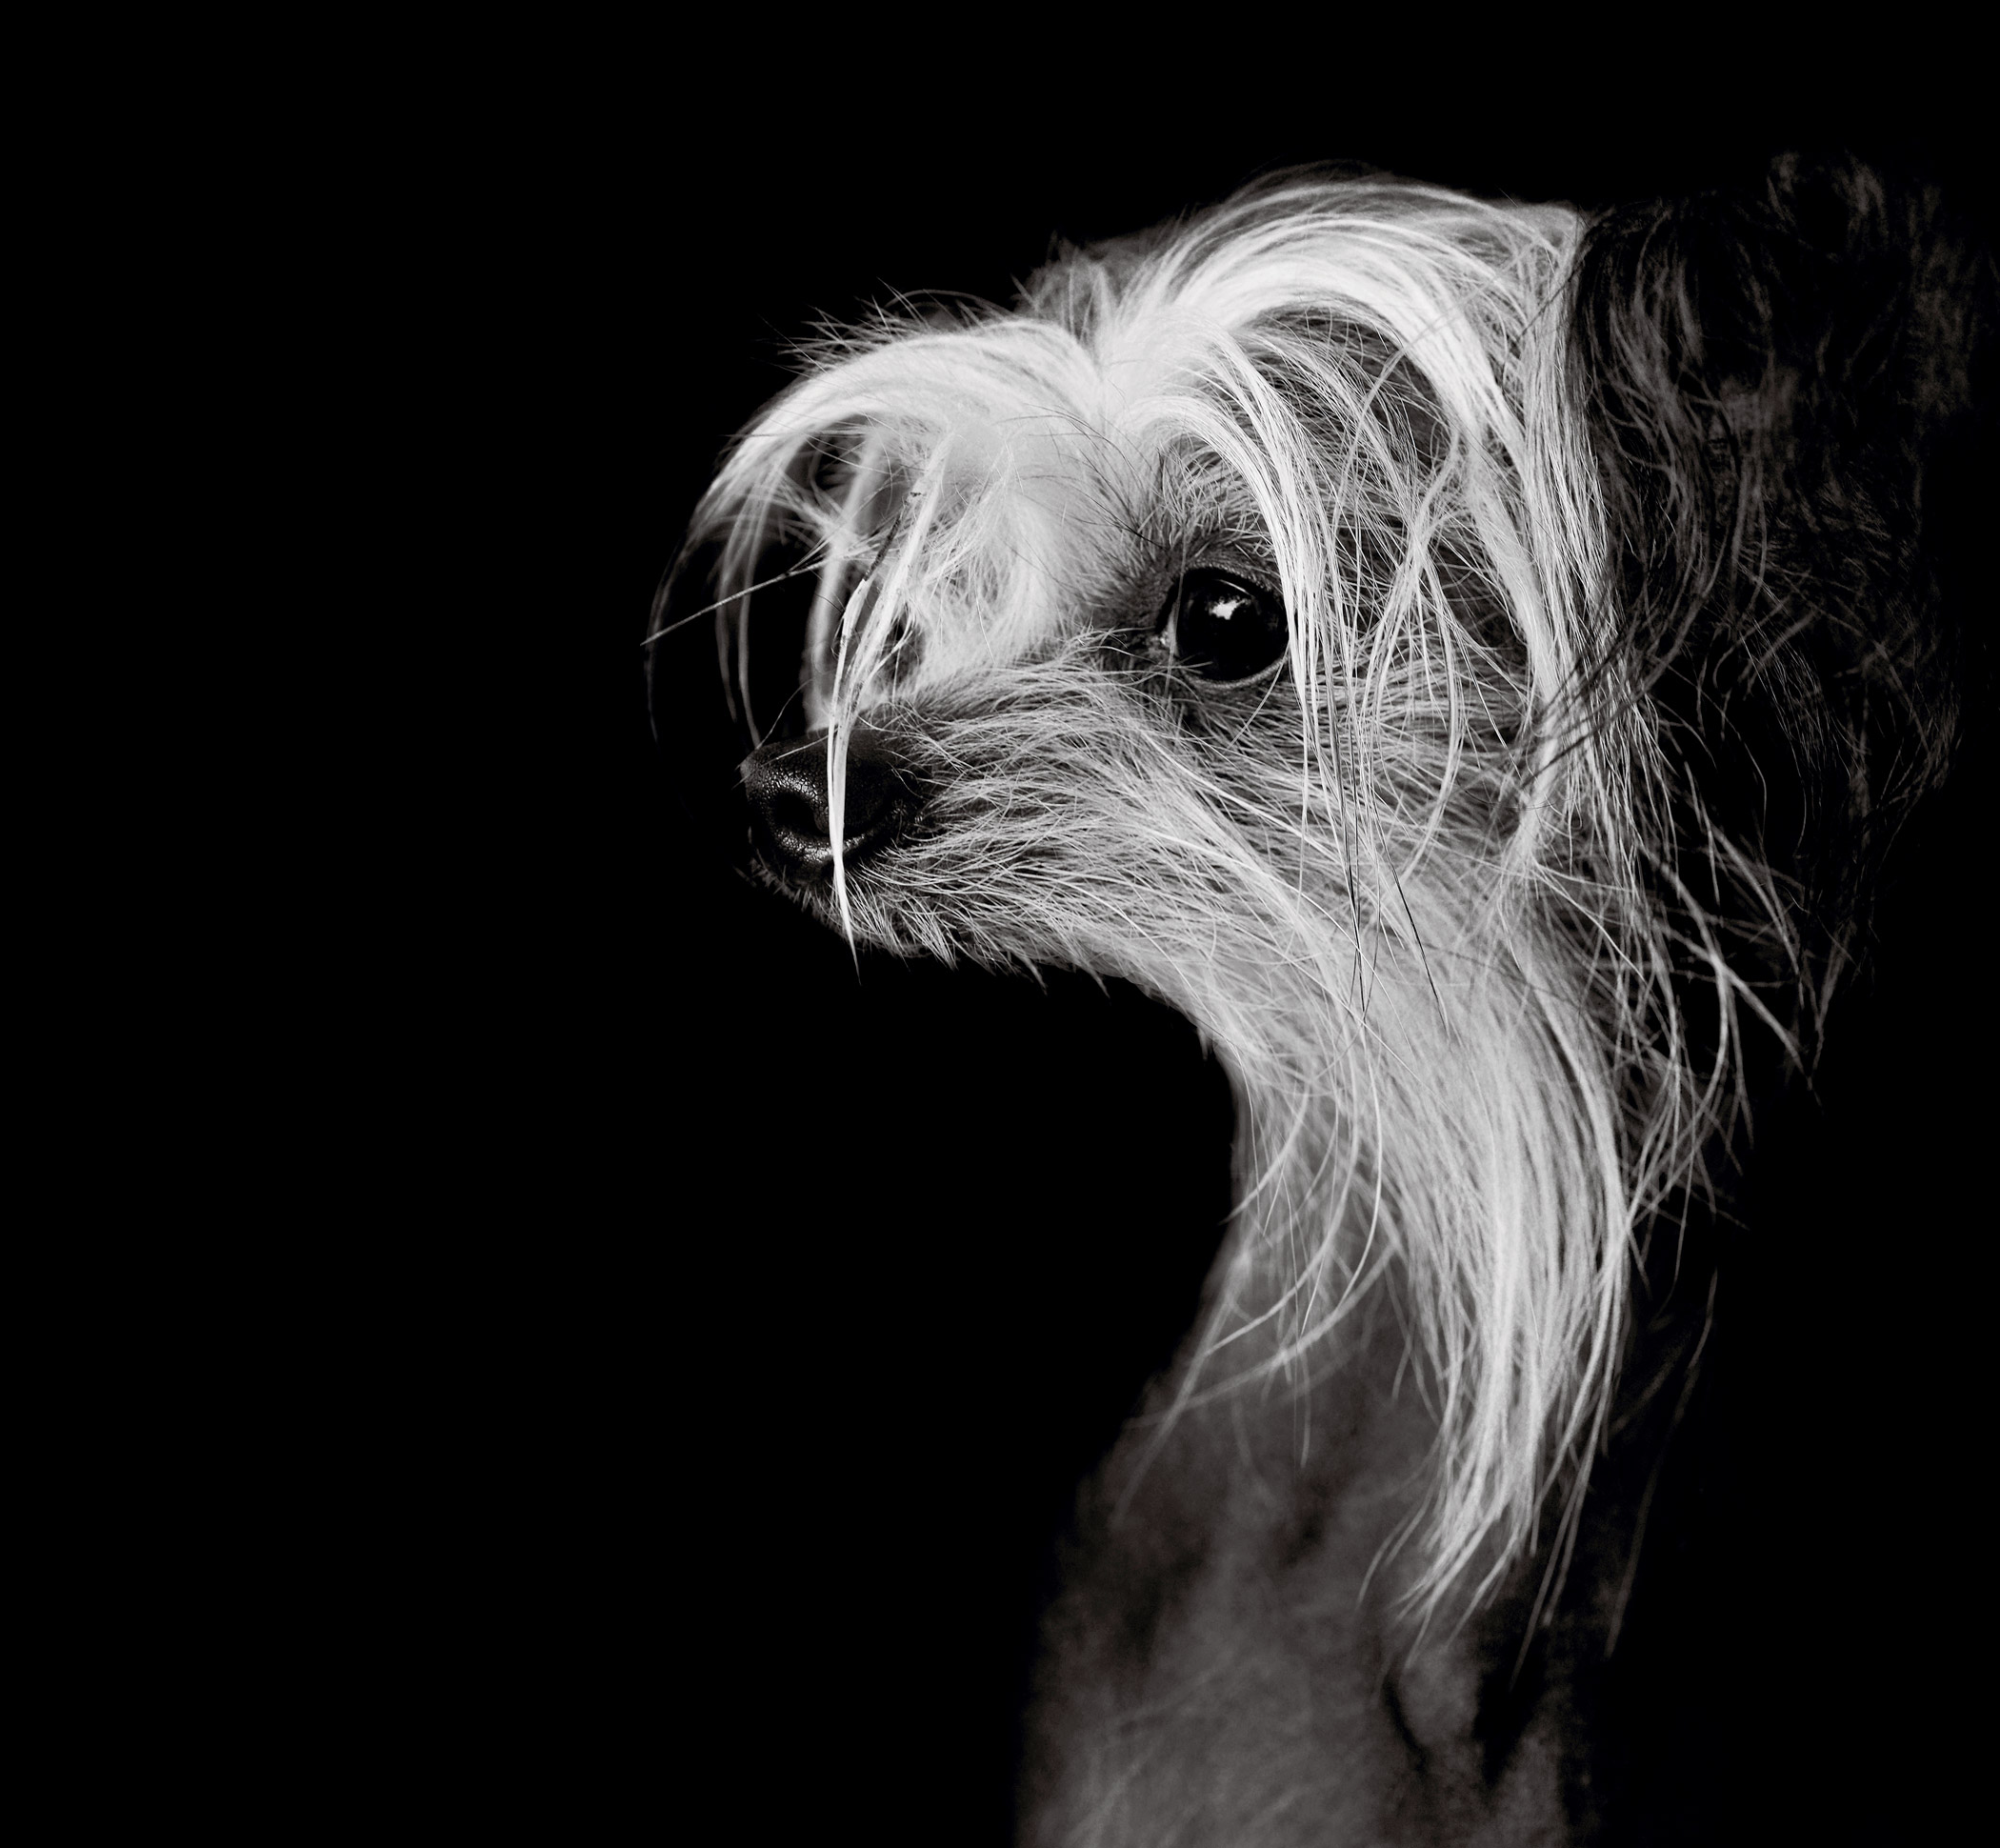 Foxtrot is a purebred Chinese crested. Her owner was a victim of domestic violence and was forced to enter into a victim relocation program.